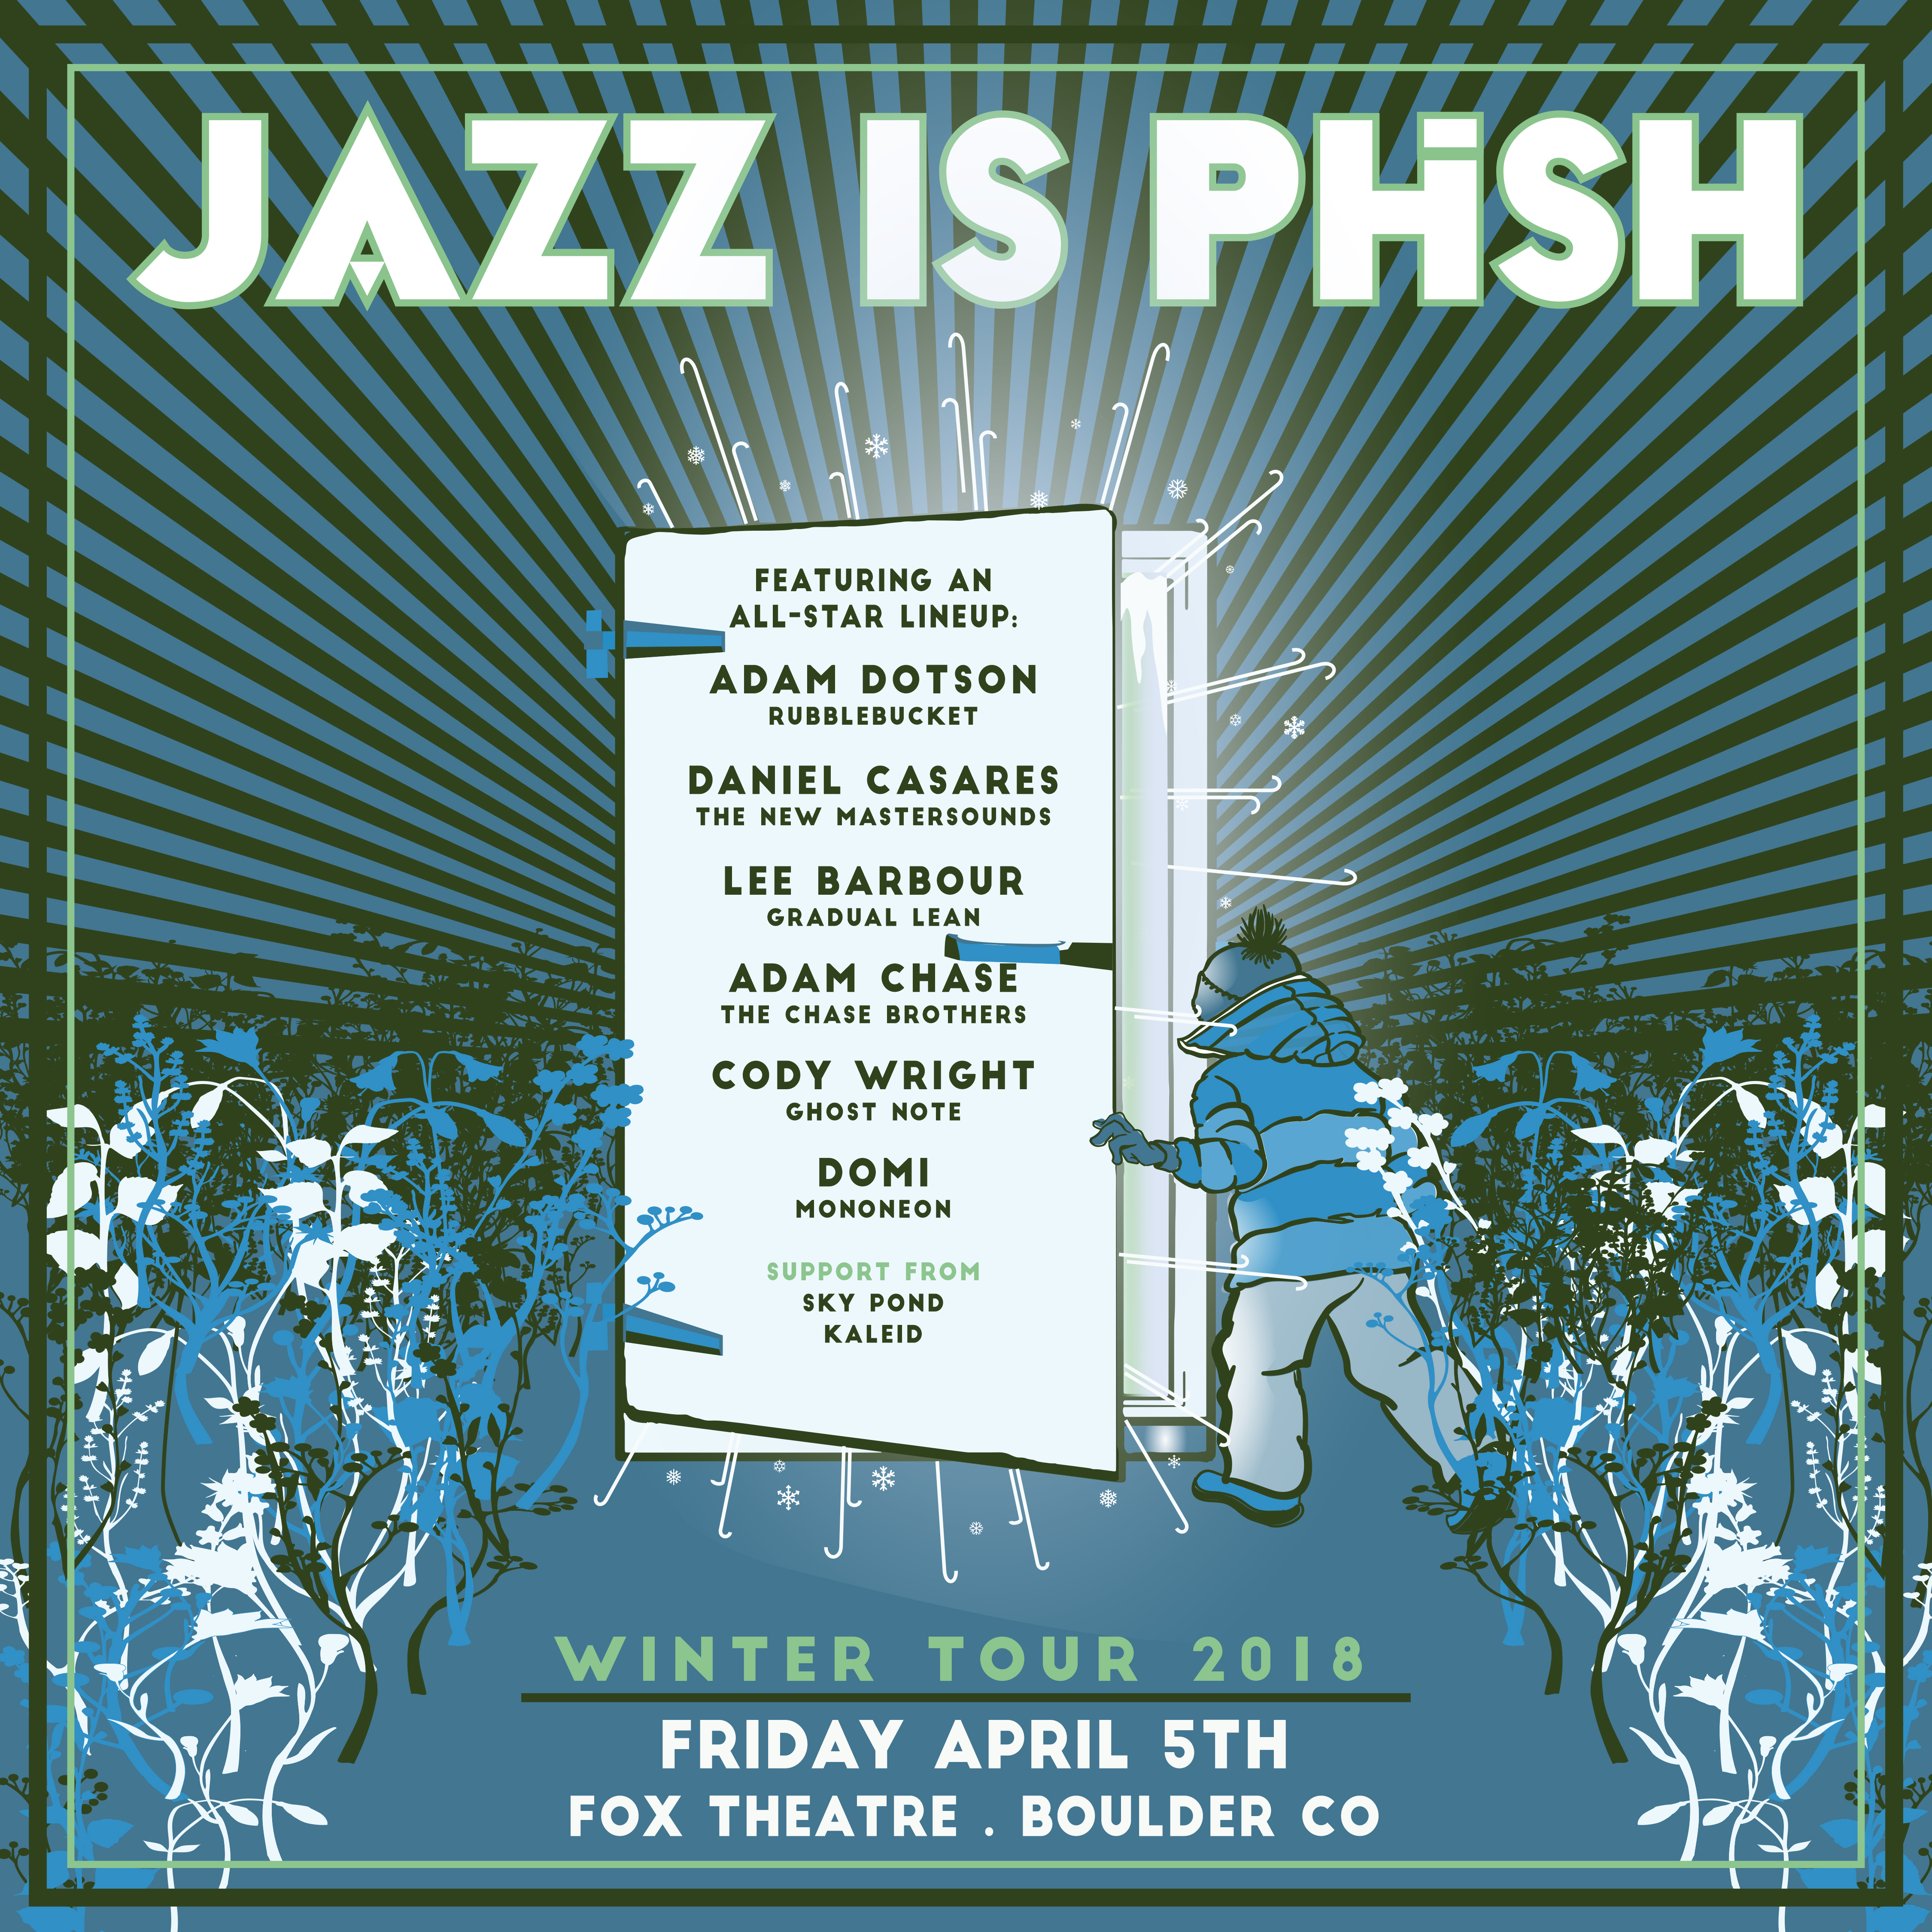 Jazz is Phsh @ The Fox Theatre | 4/5/19 | Preview